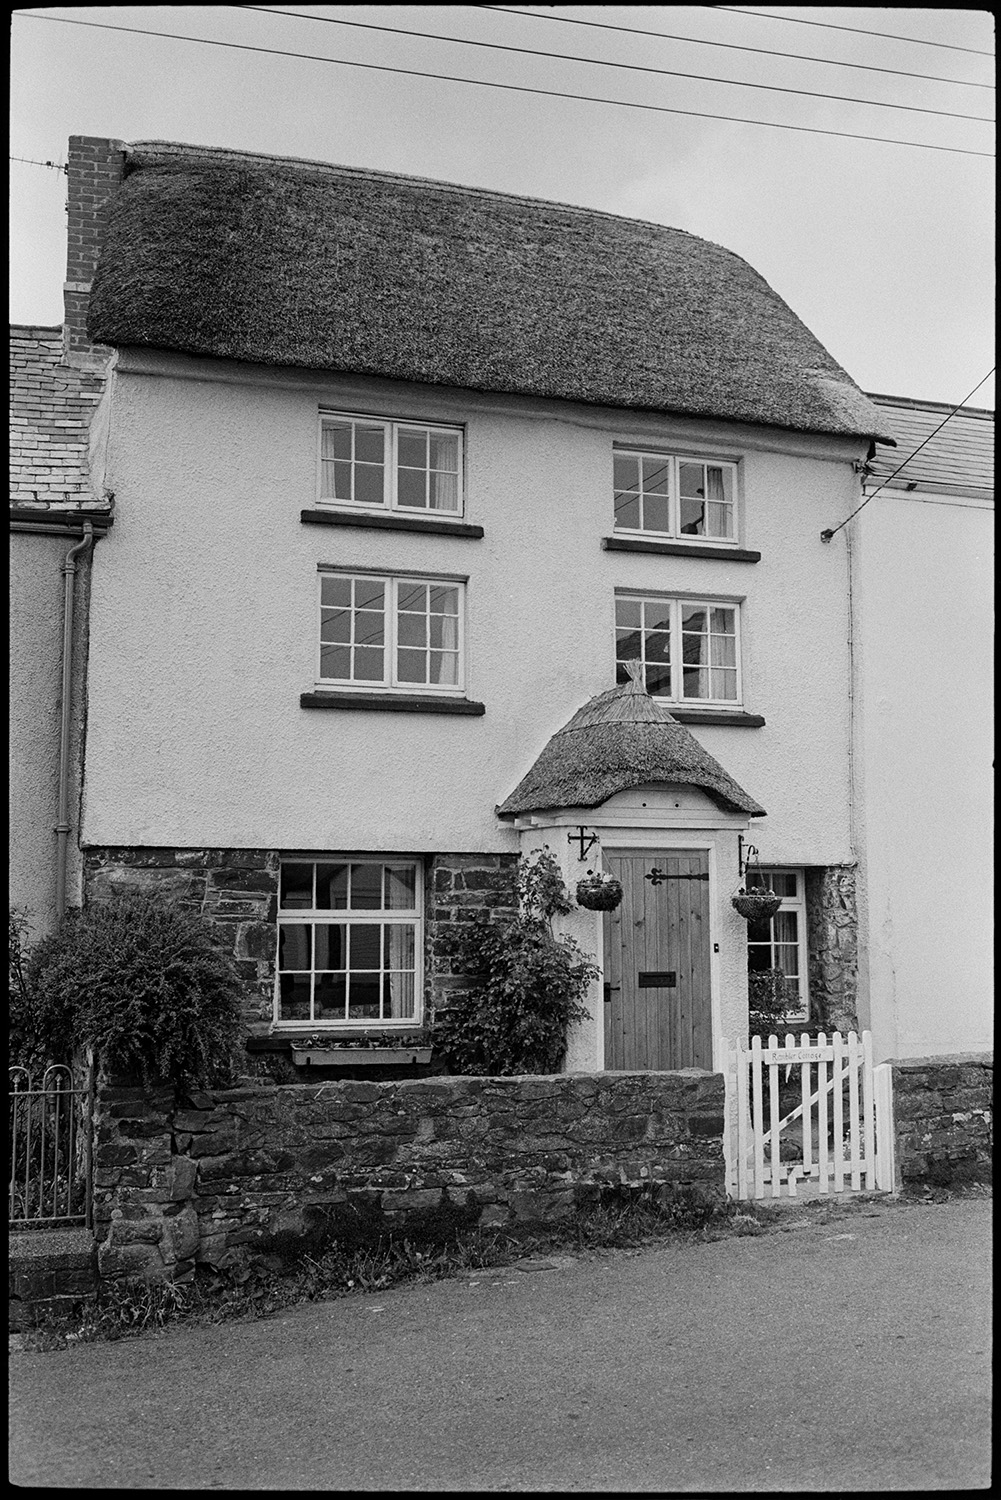 Modernised thatched cottage example of hideous conversion, see old photo.
[The front of Rambled Cottage at High Bickington. The three storey thatched cottage has been modernised. Hanging baskets decorate the door in the thatched porch. The gate ]